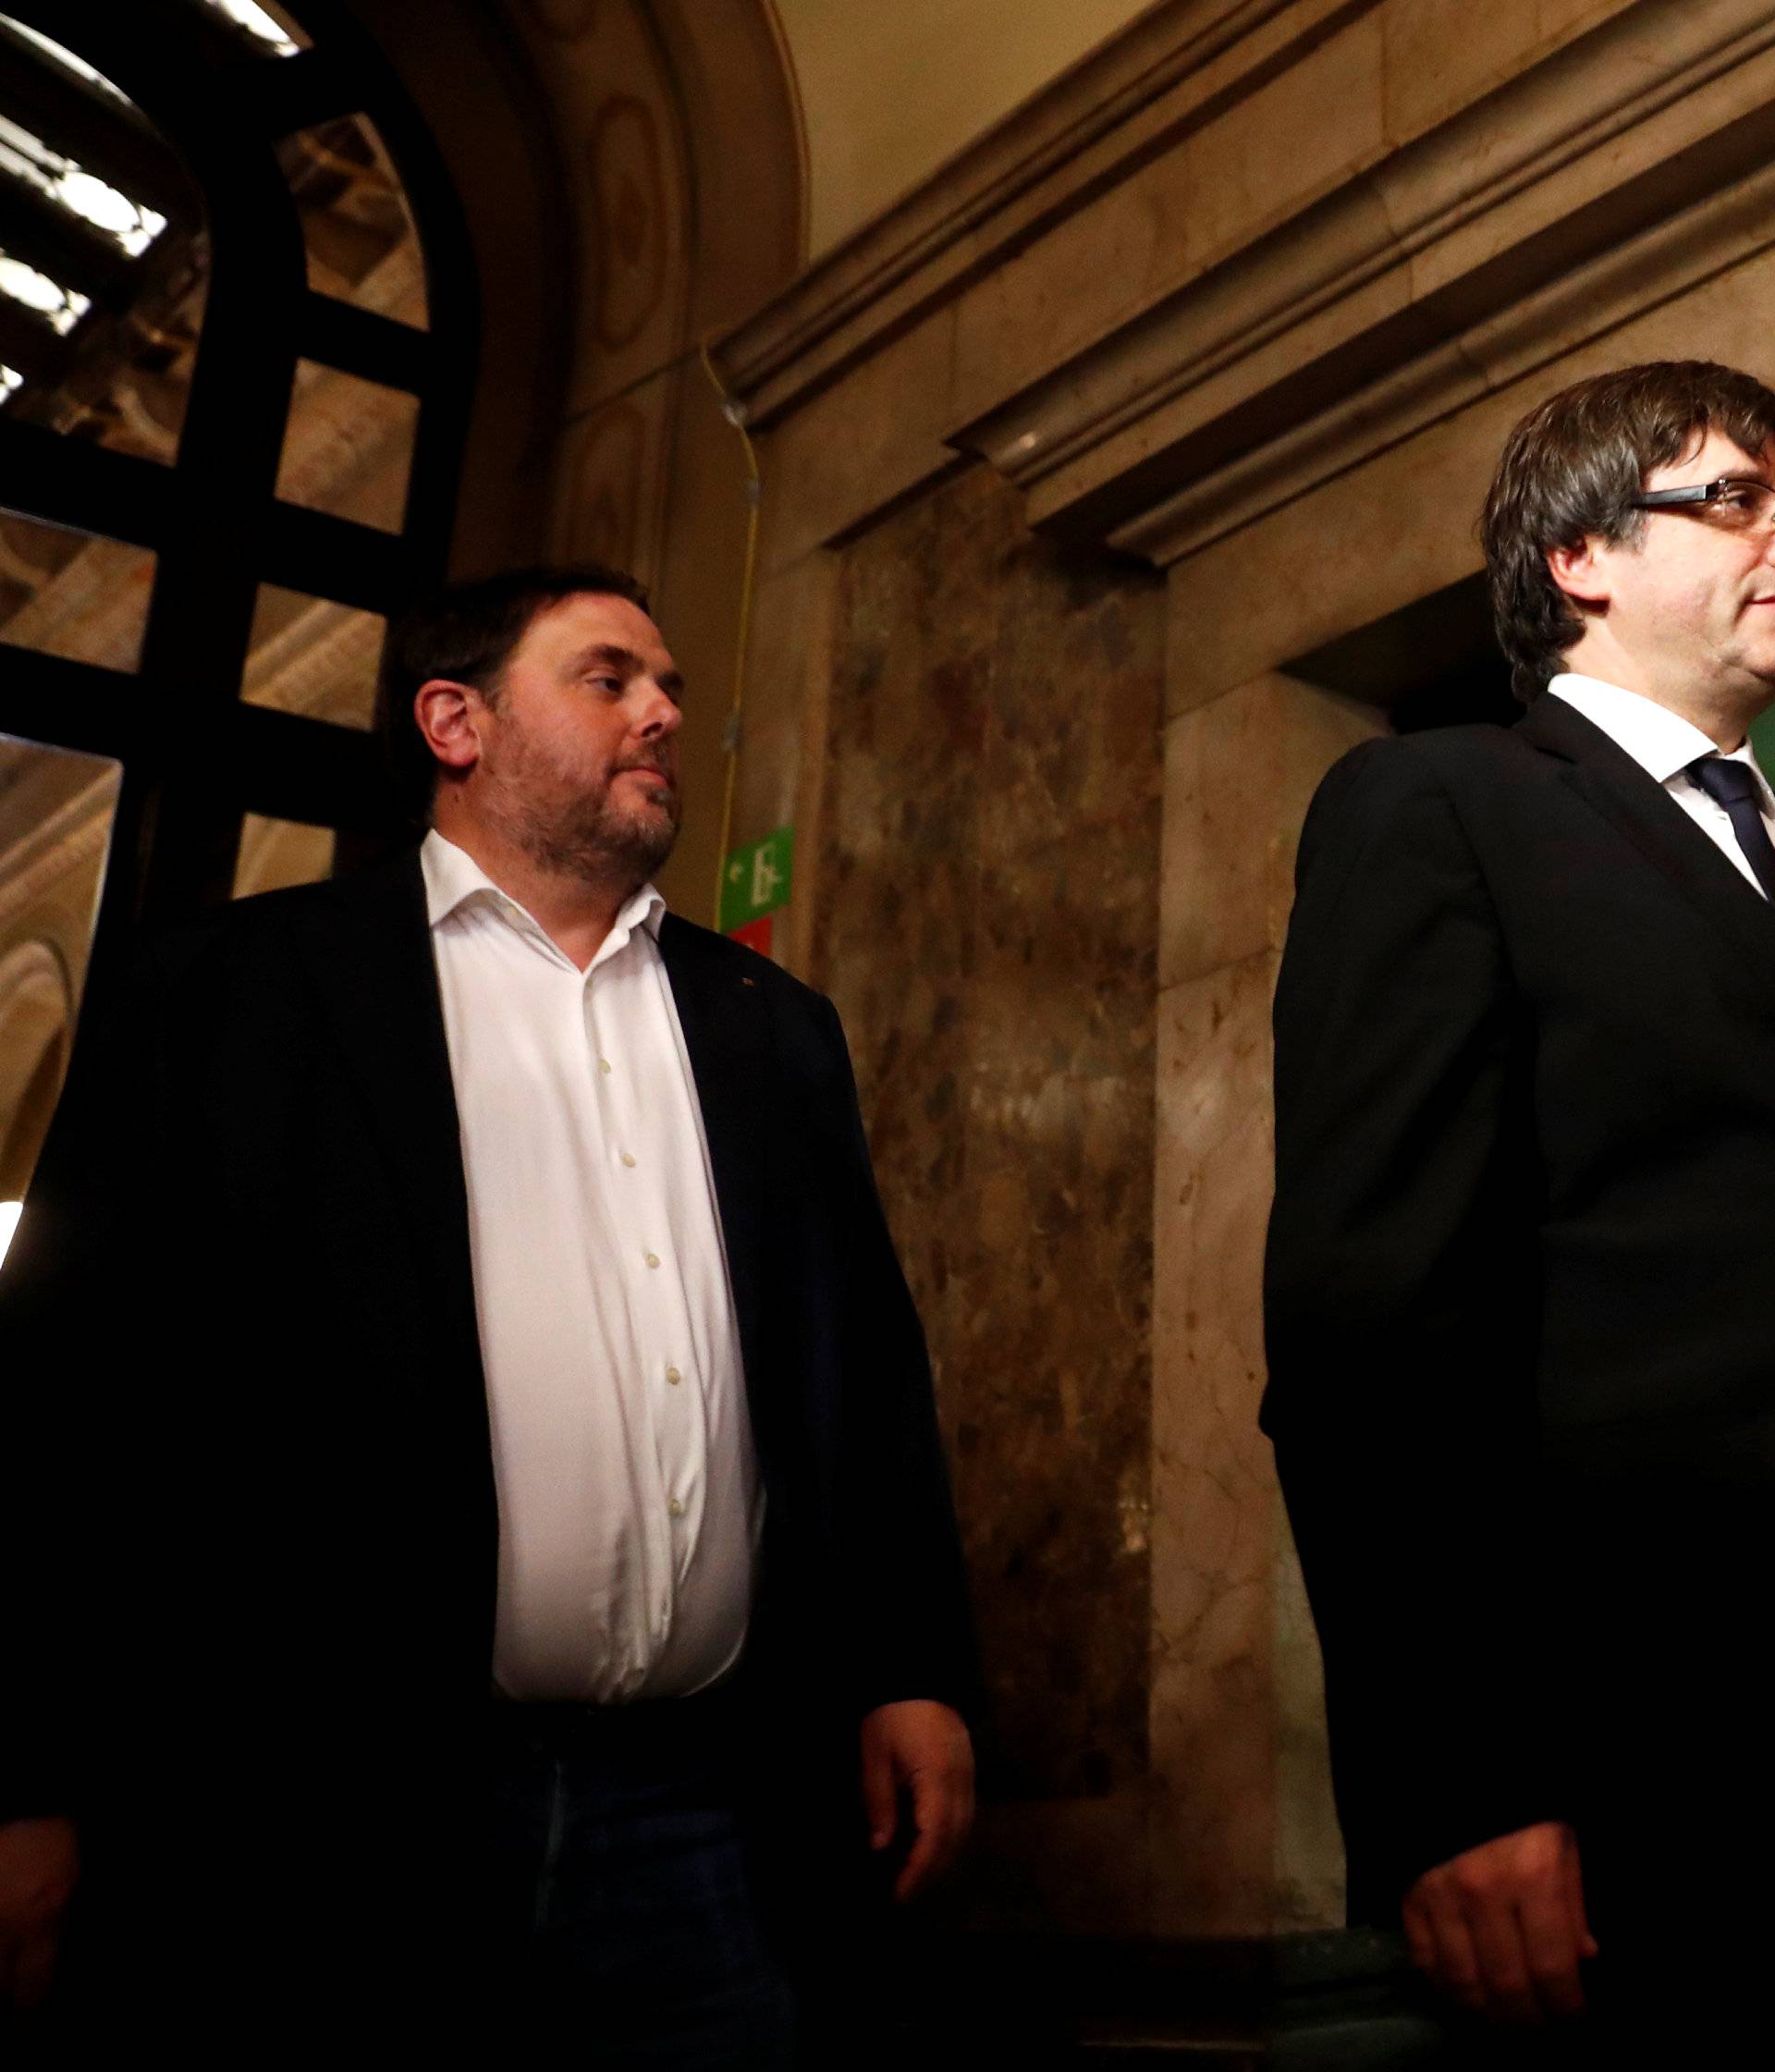 Catalan President Carles Puigdemont walks to the chamber at the Catalonian regional parliament in Barcelona